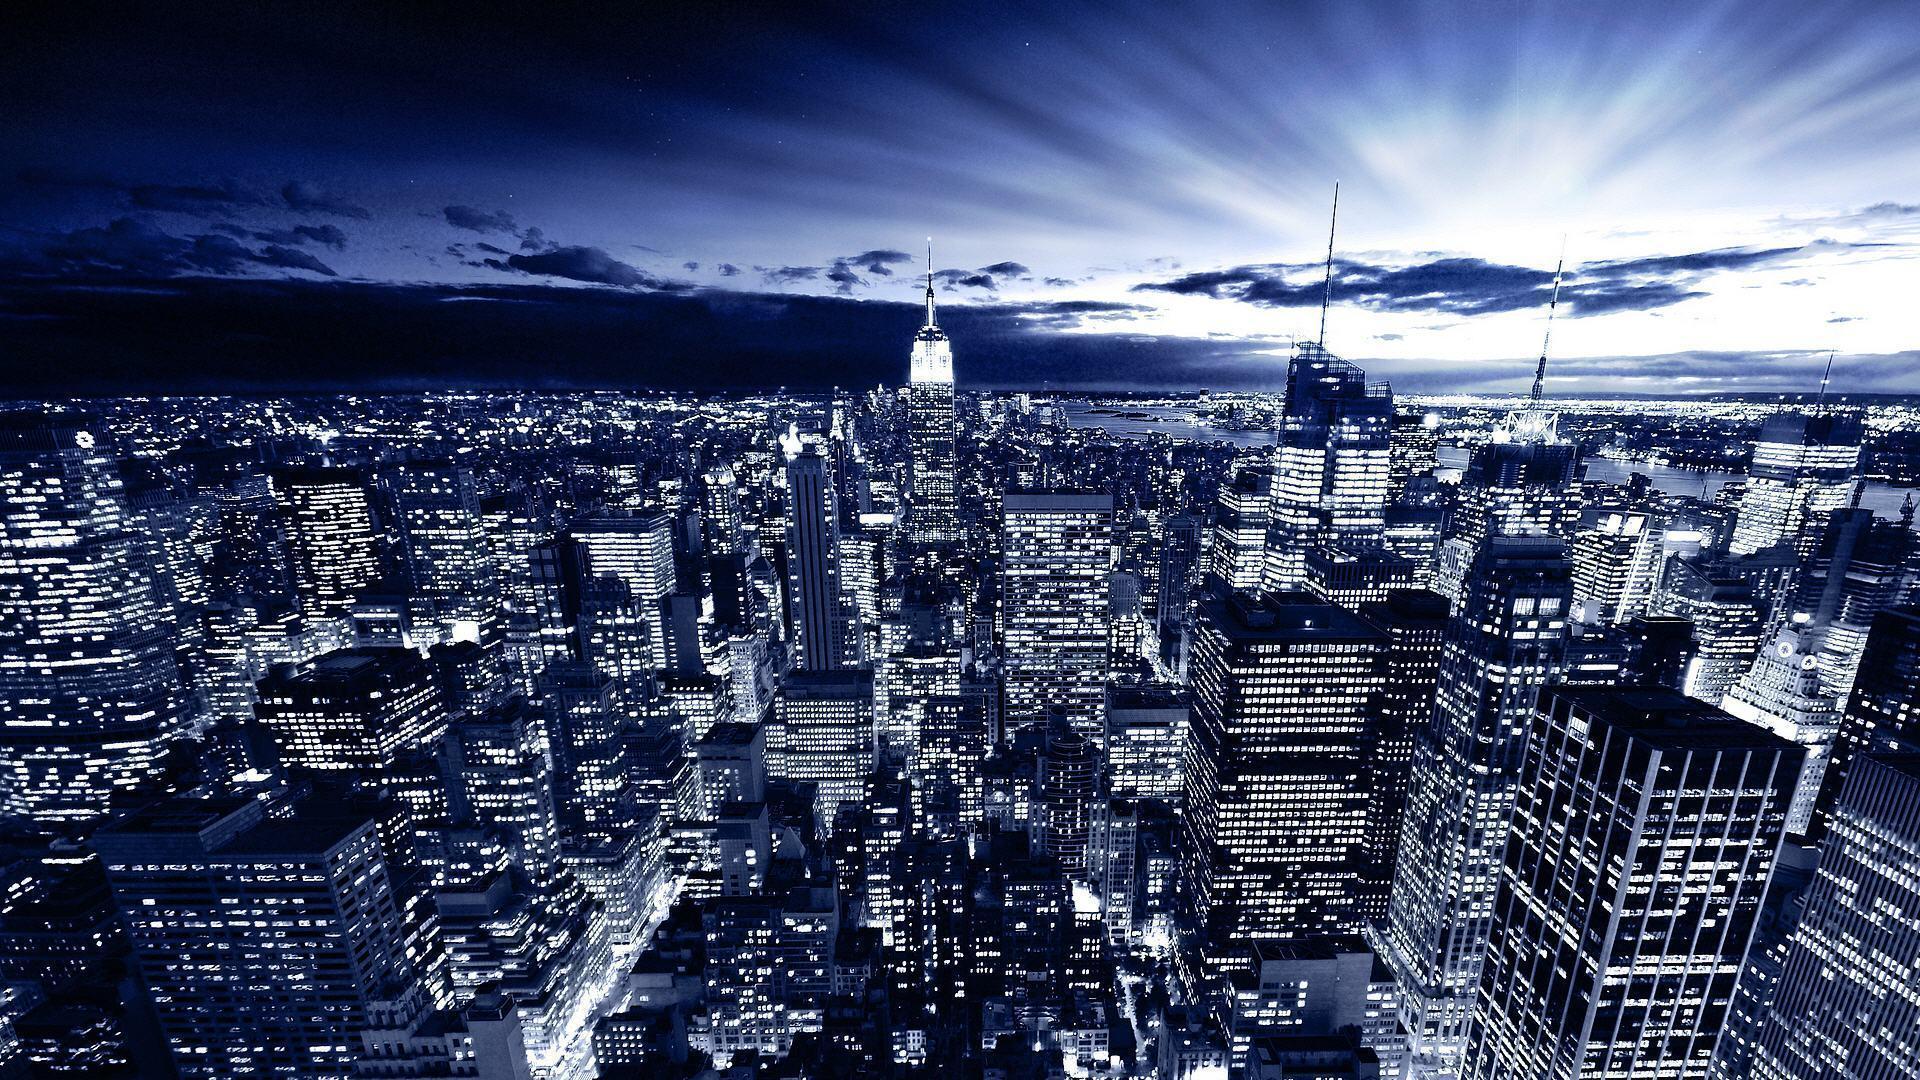 Image For > New York City Wallpapers At Night